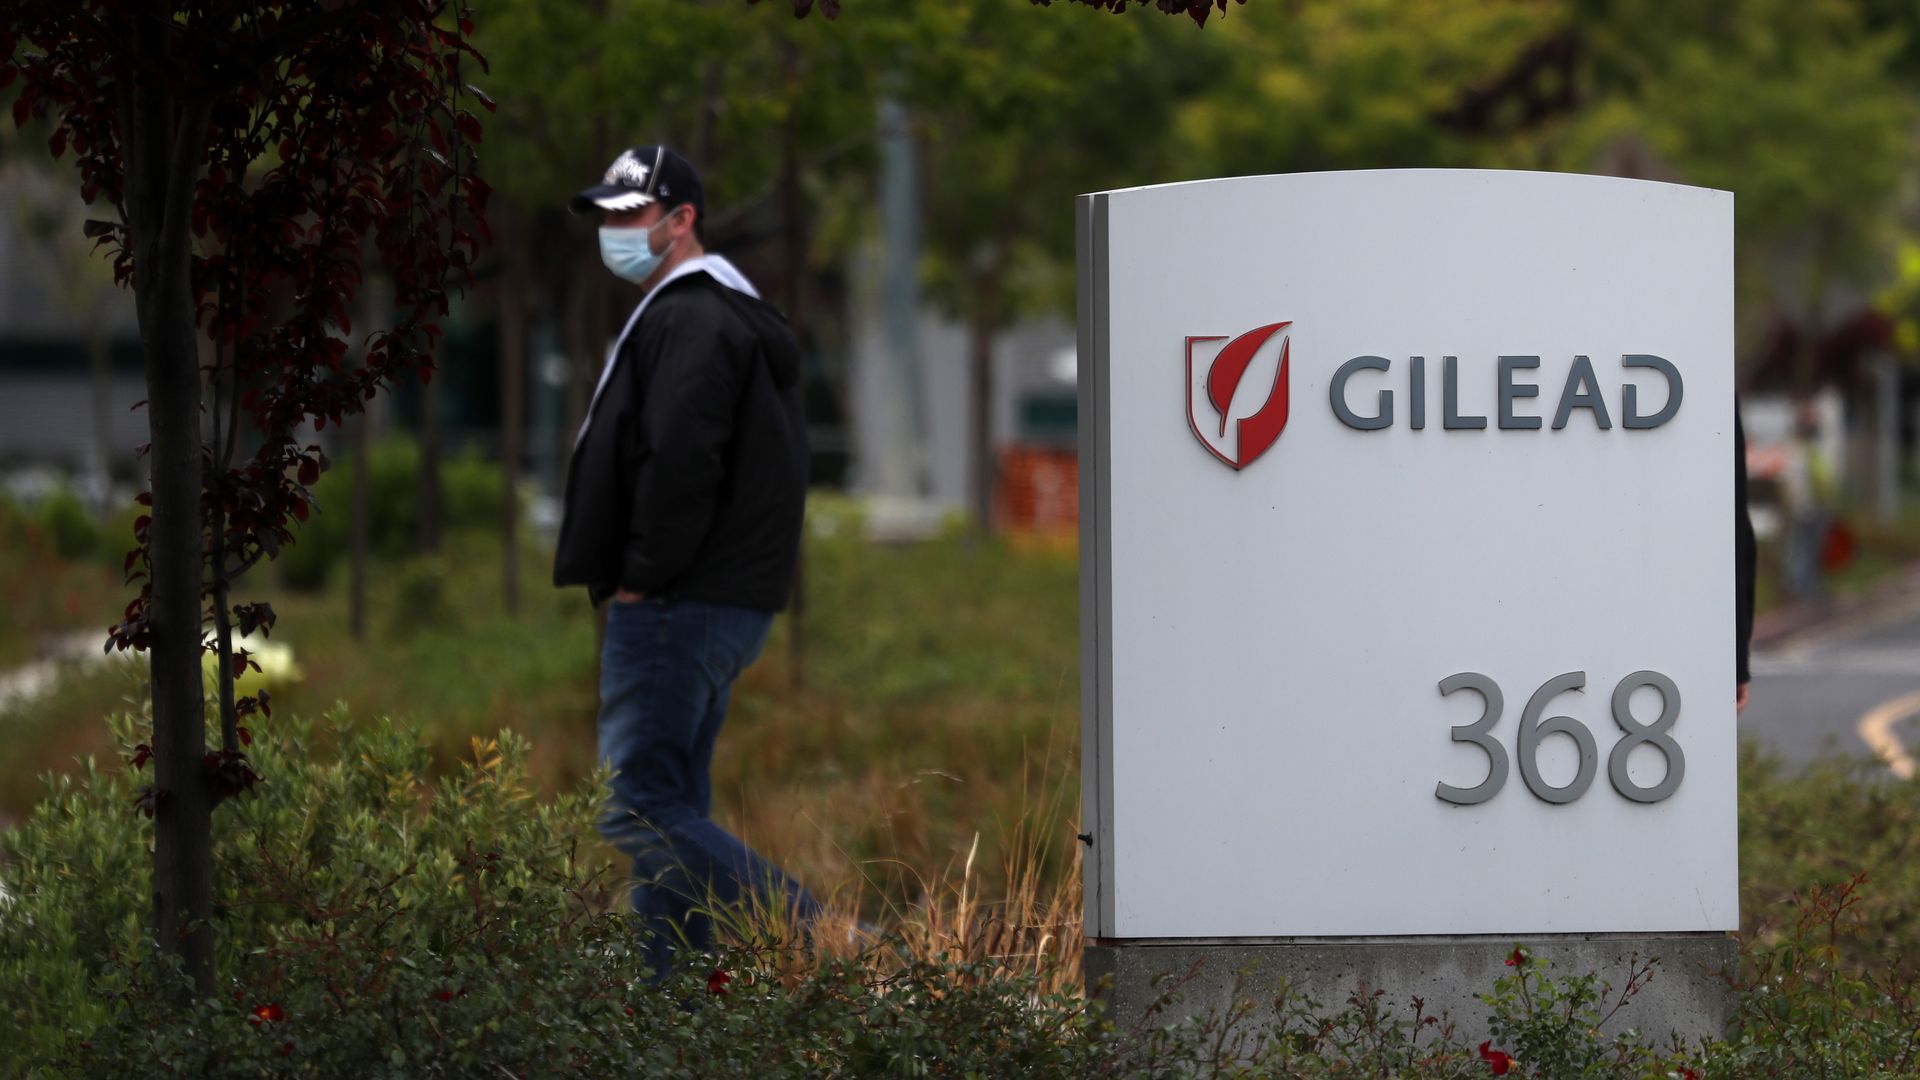 In this image, a masked man stands next to a sign for Gilead